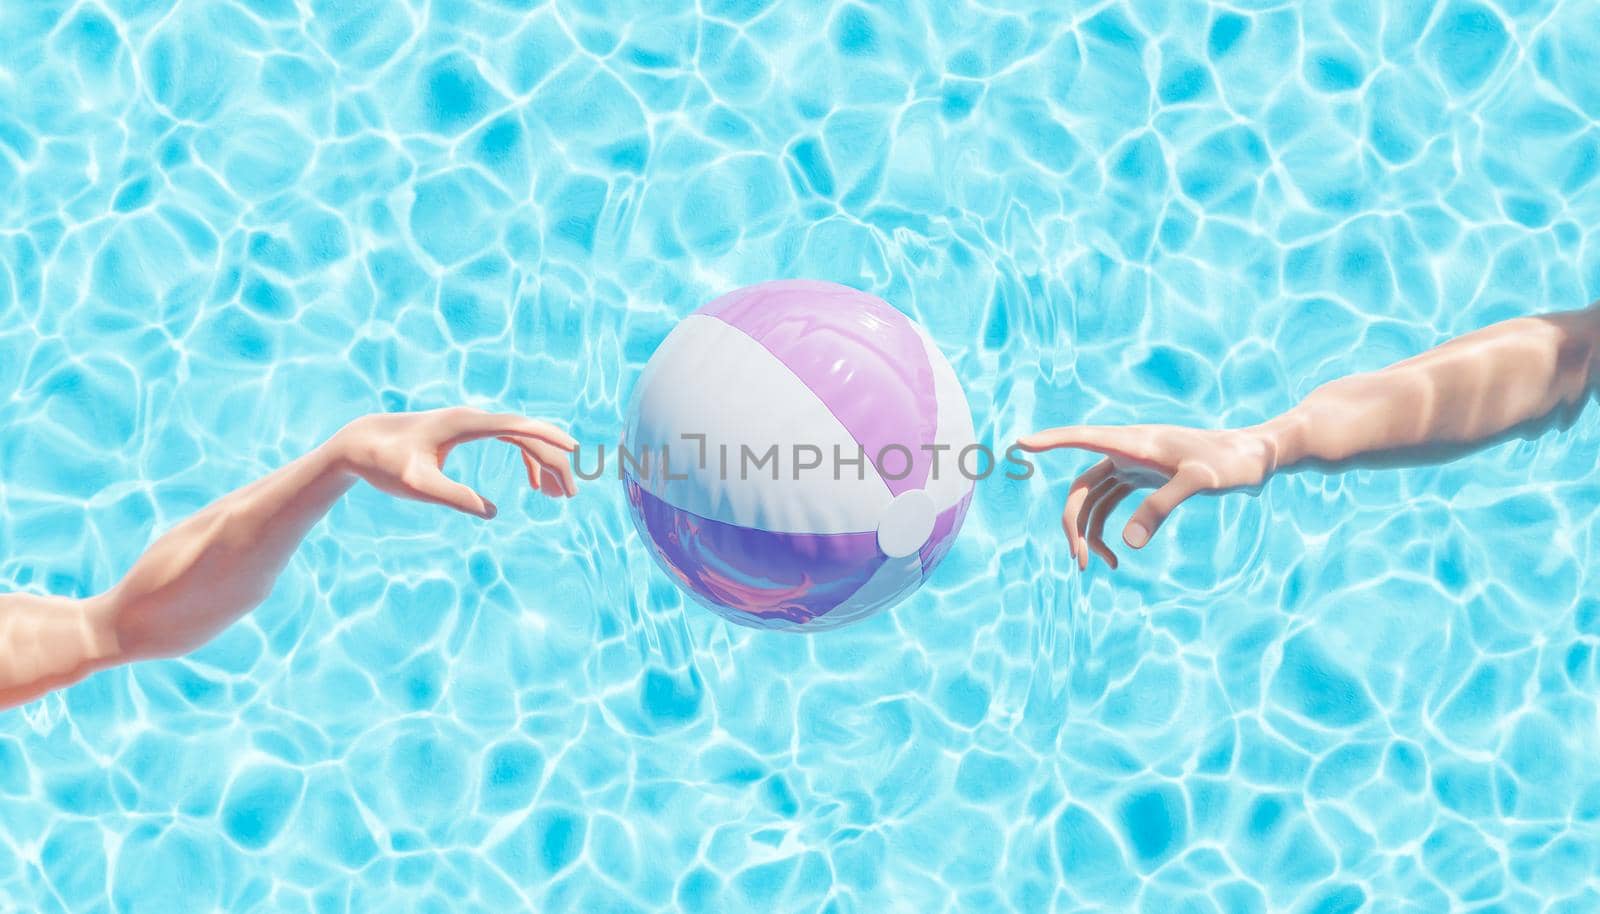 Top view 3D rendering of crop unrecognizable people underwater of outdoor swimming pool reaching out toward inflatable ball on sunny day